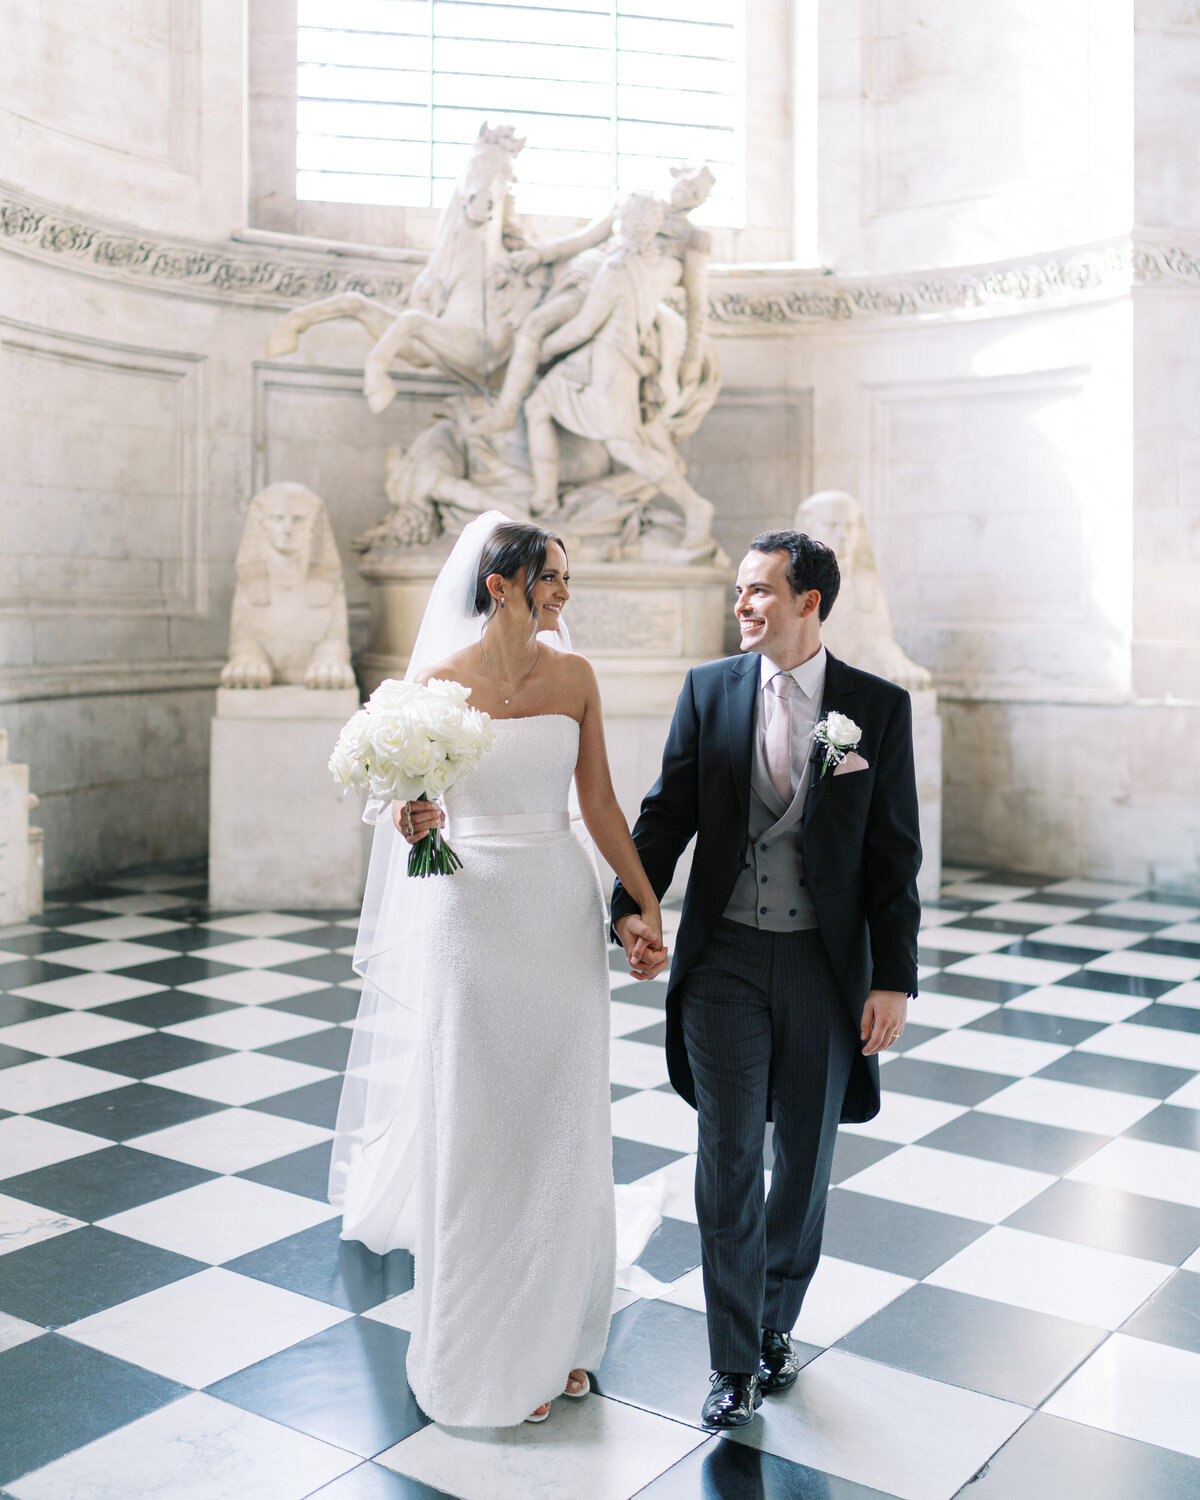 Bride and groom at classic wedding in St. Paul's cathedral